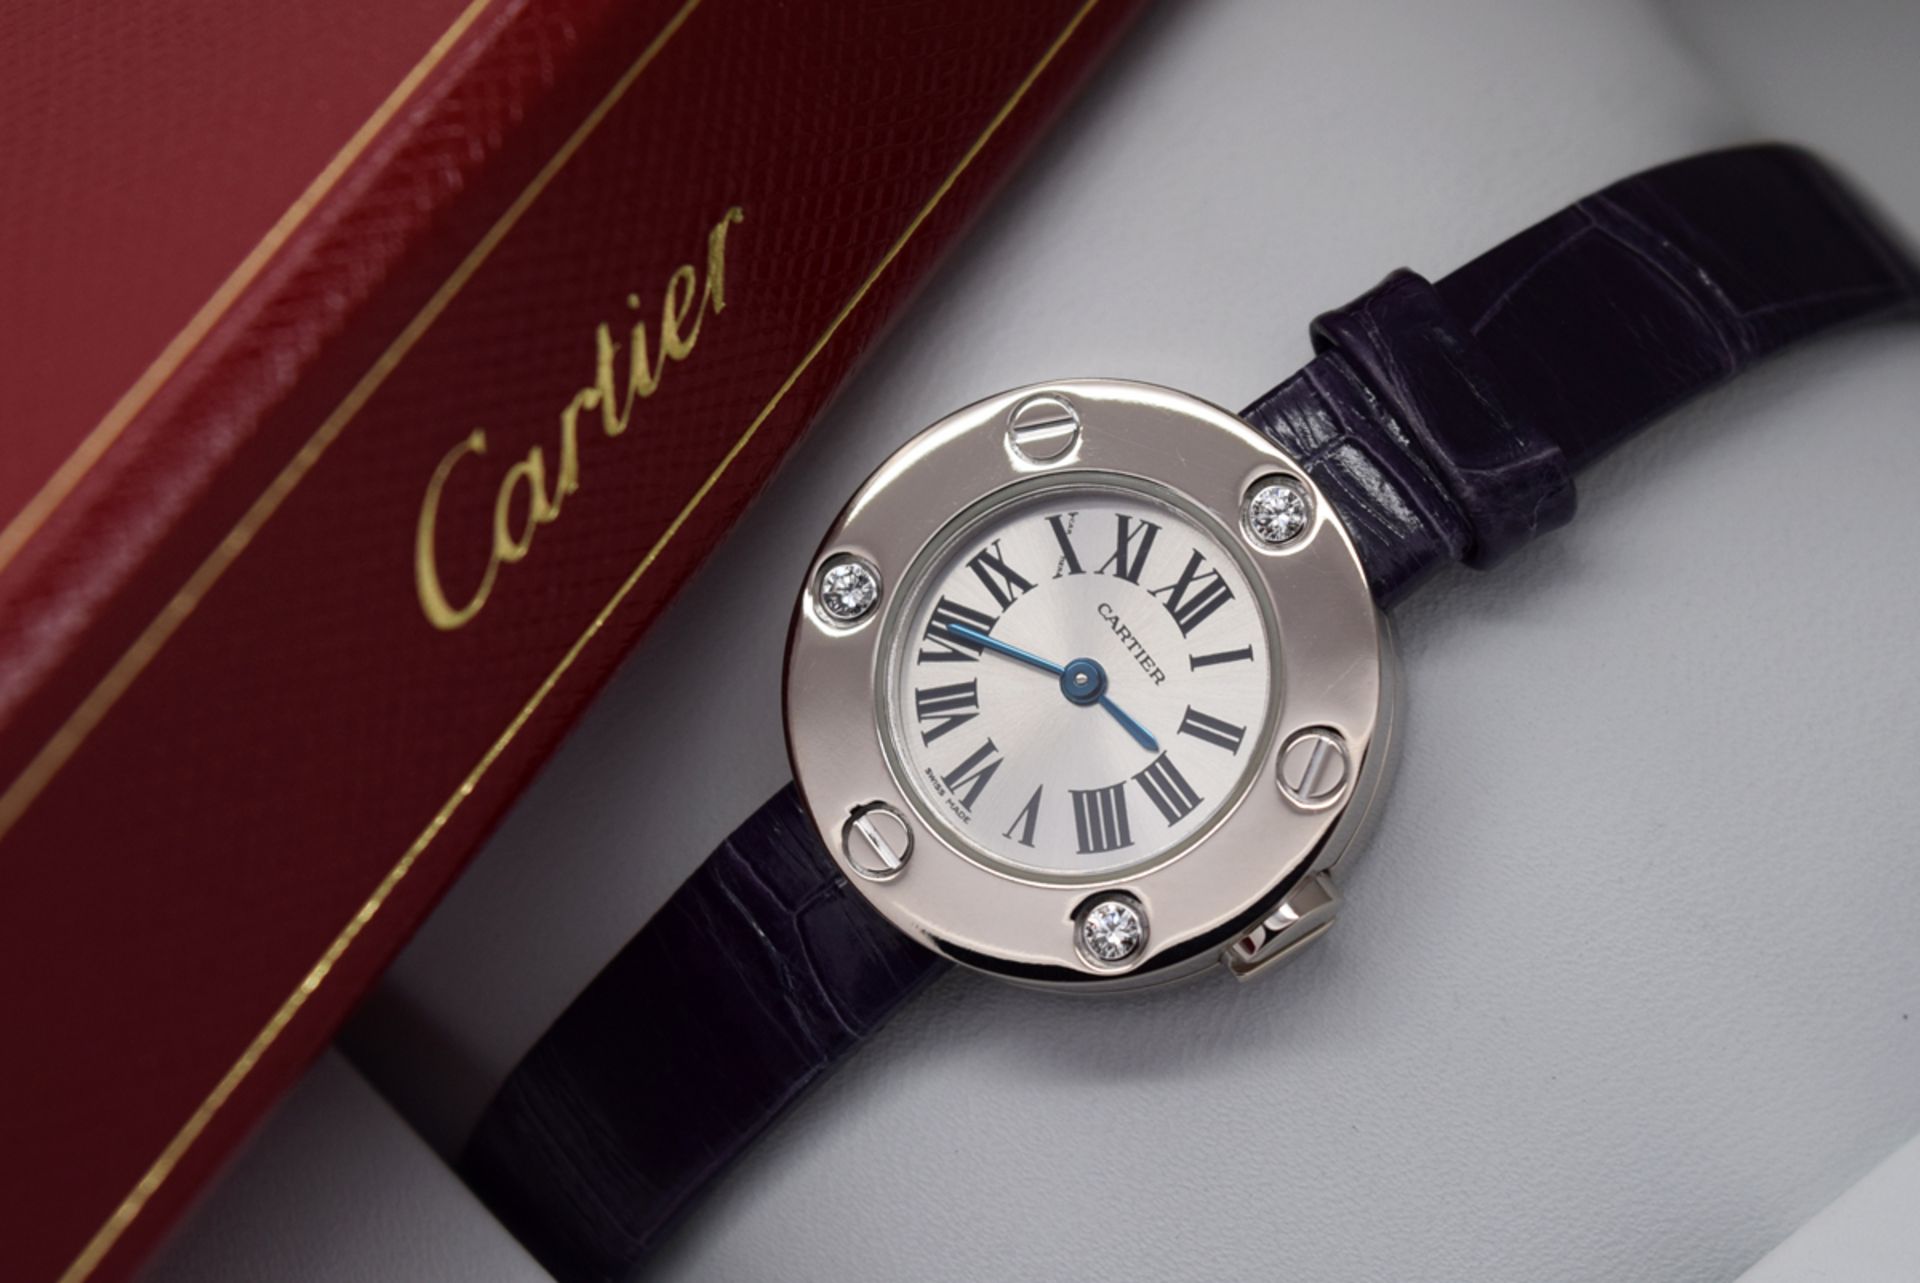 CARTIER 'LOVE' DIAMONDS WATCH - 18K WHITE GOLD AND DIAMONDS - BOX AND PAPERS!